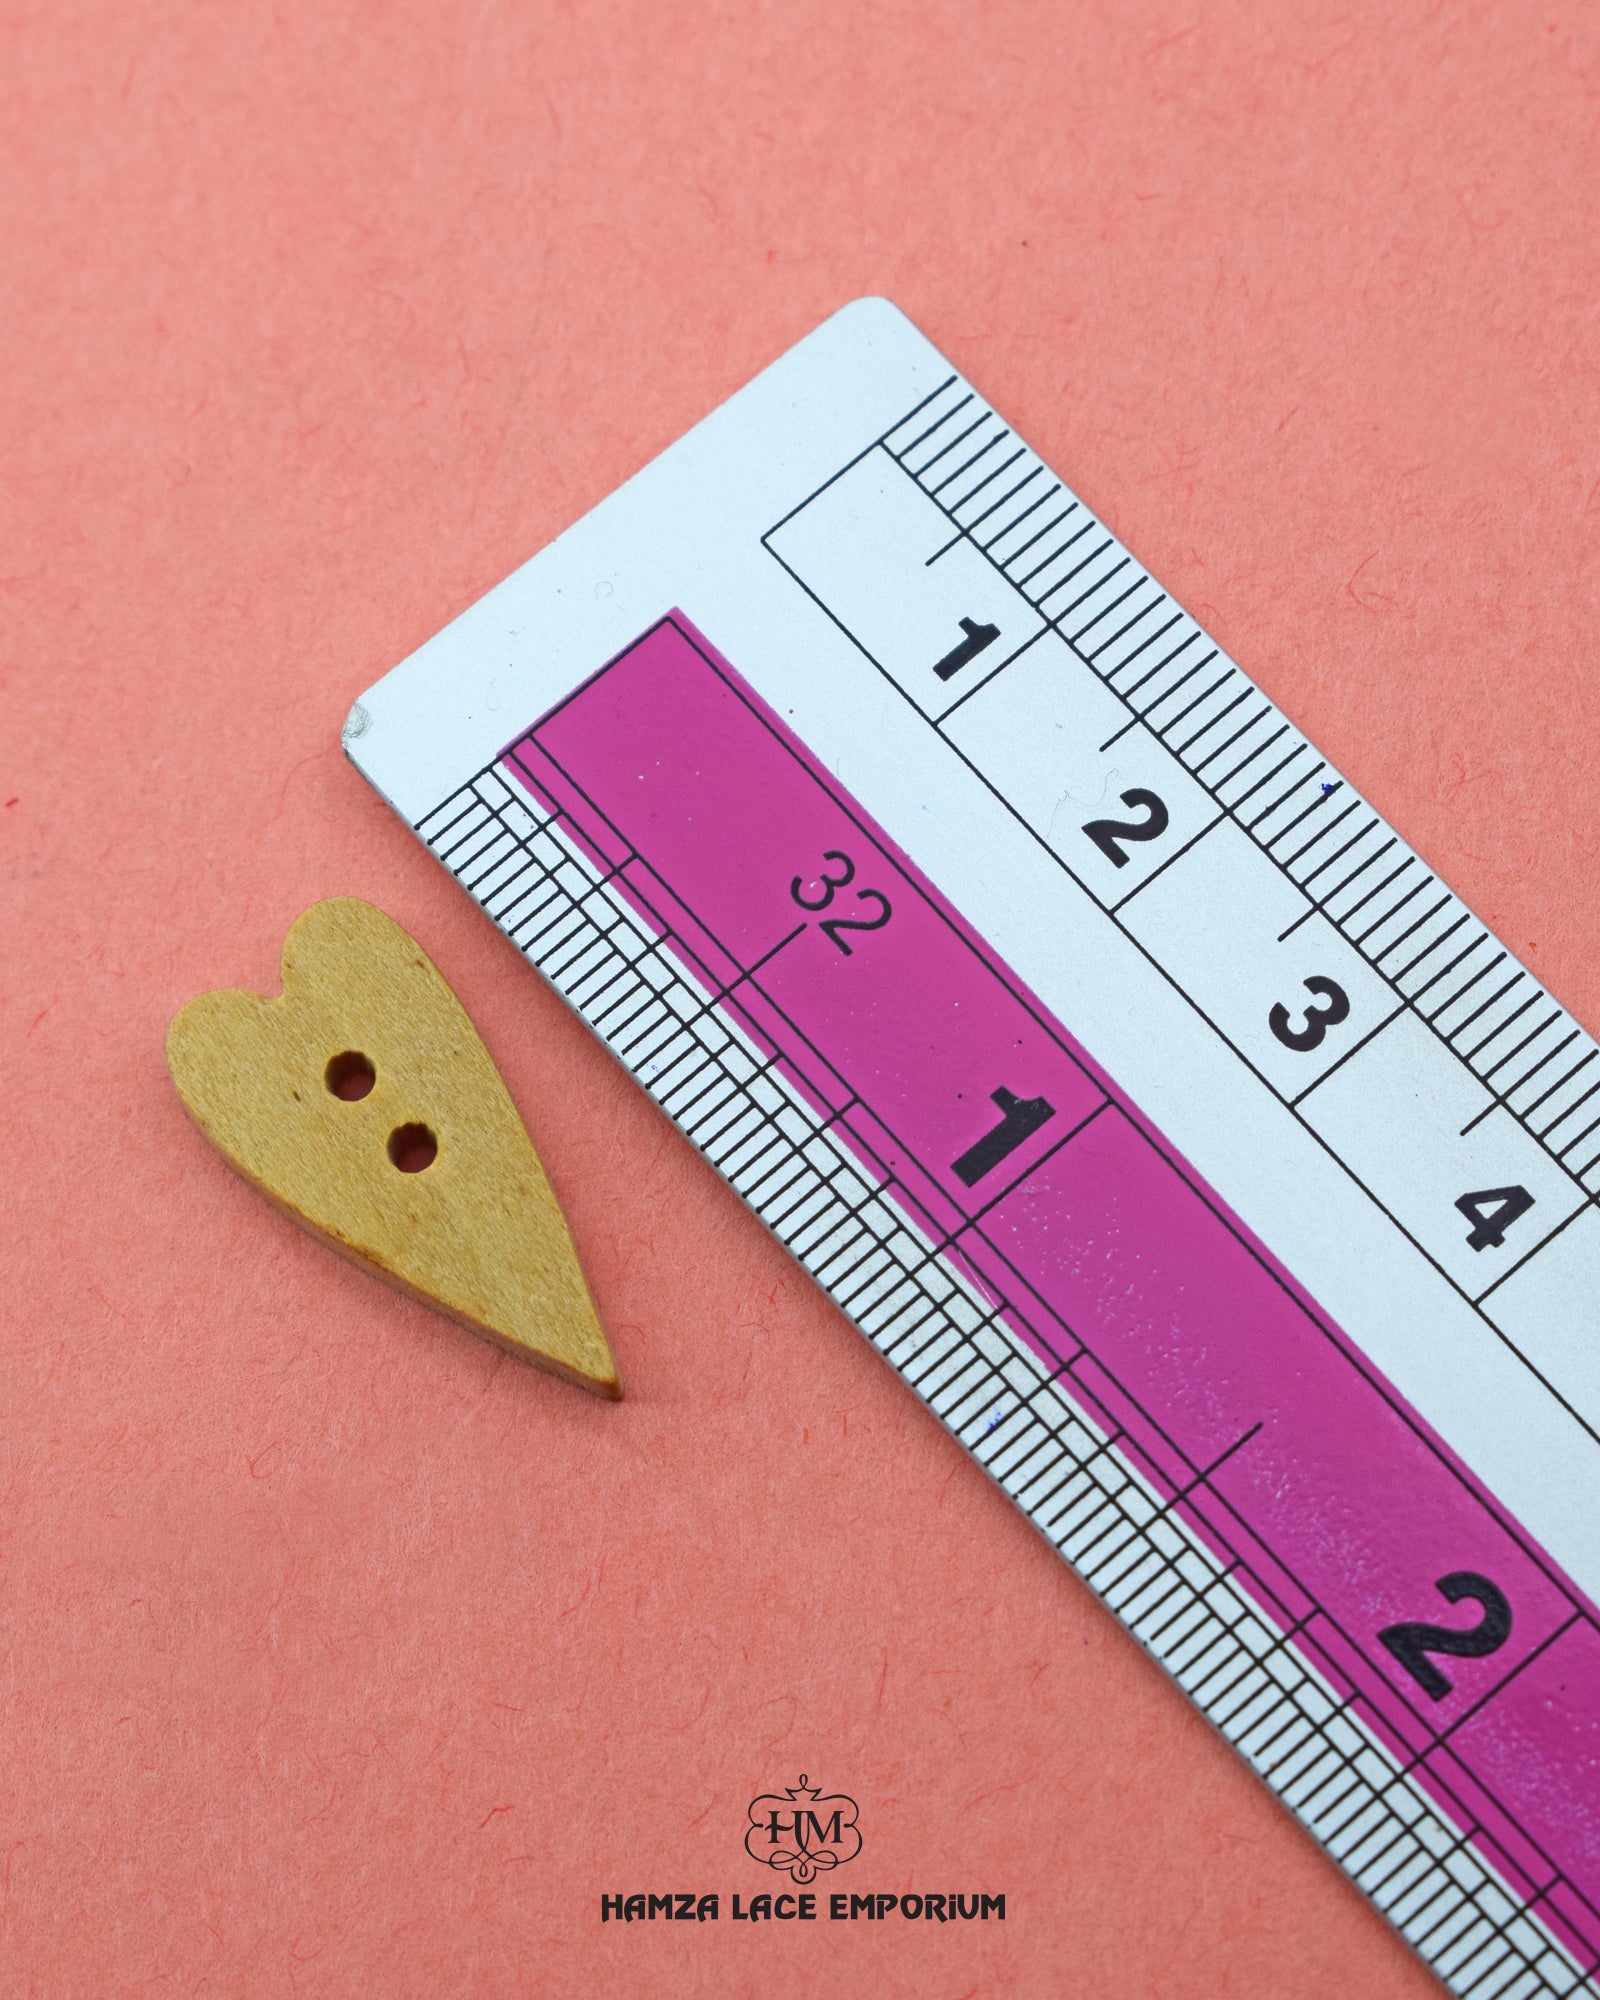 Size of the 'Wood Button WB118' is shown with a ruler